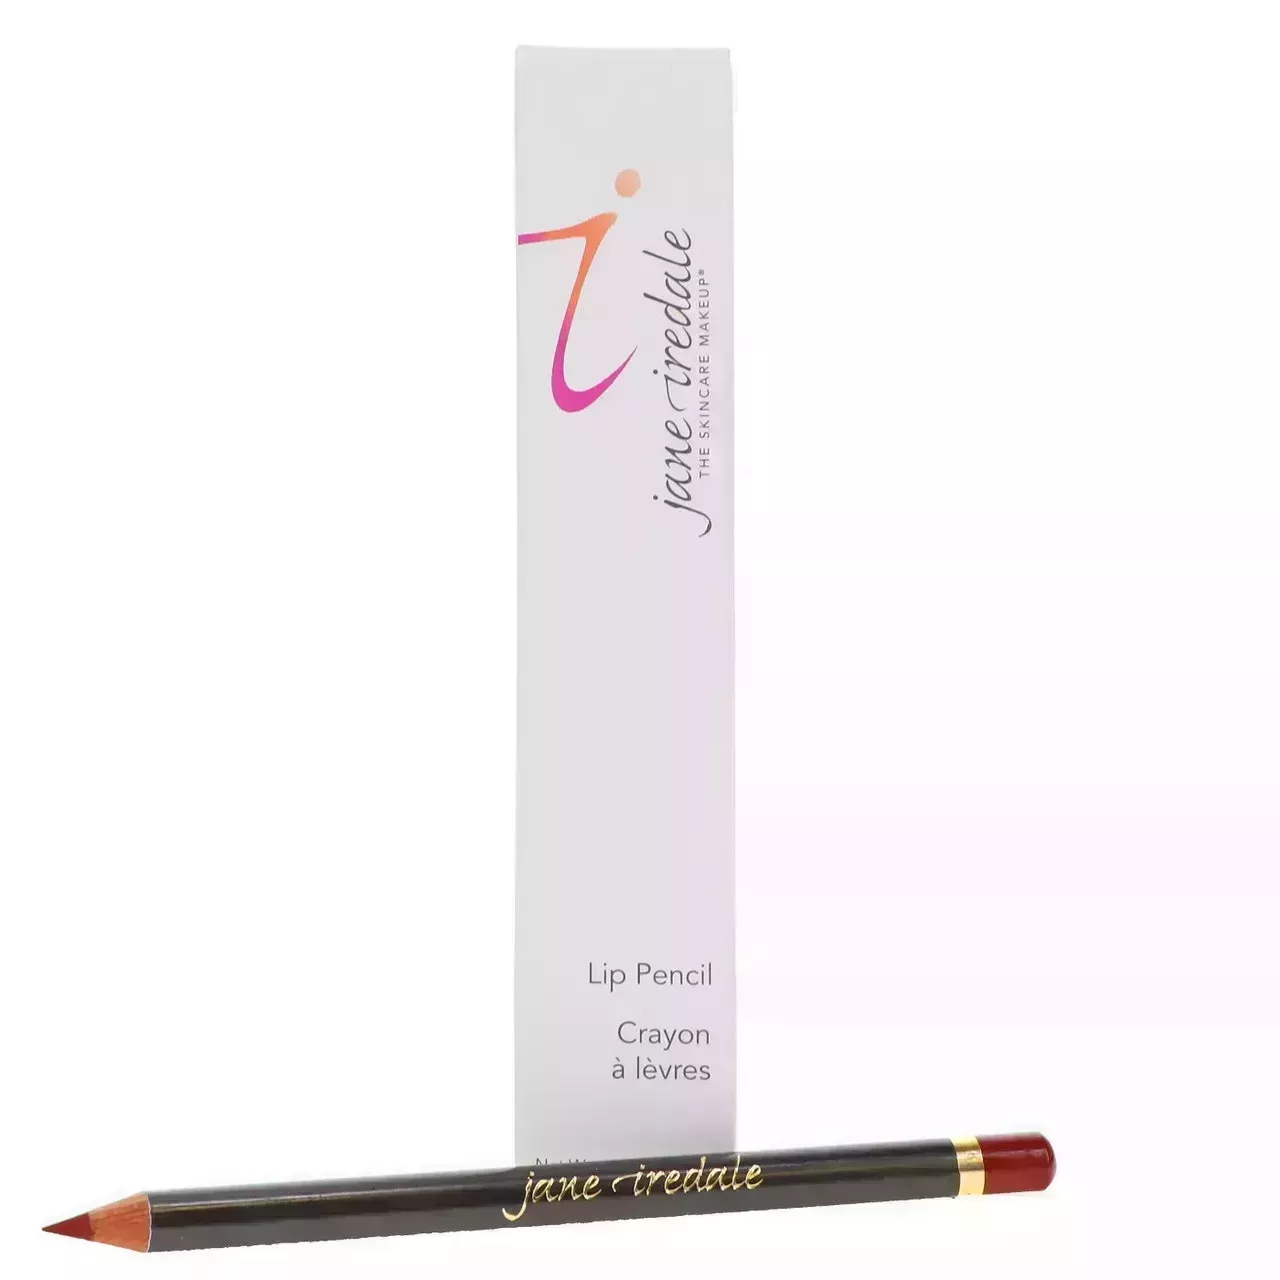 Jane Iredale Lip Pencil in Earth Red on white background